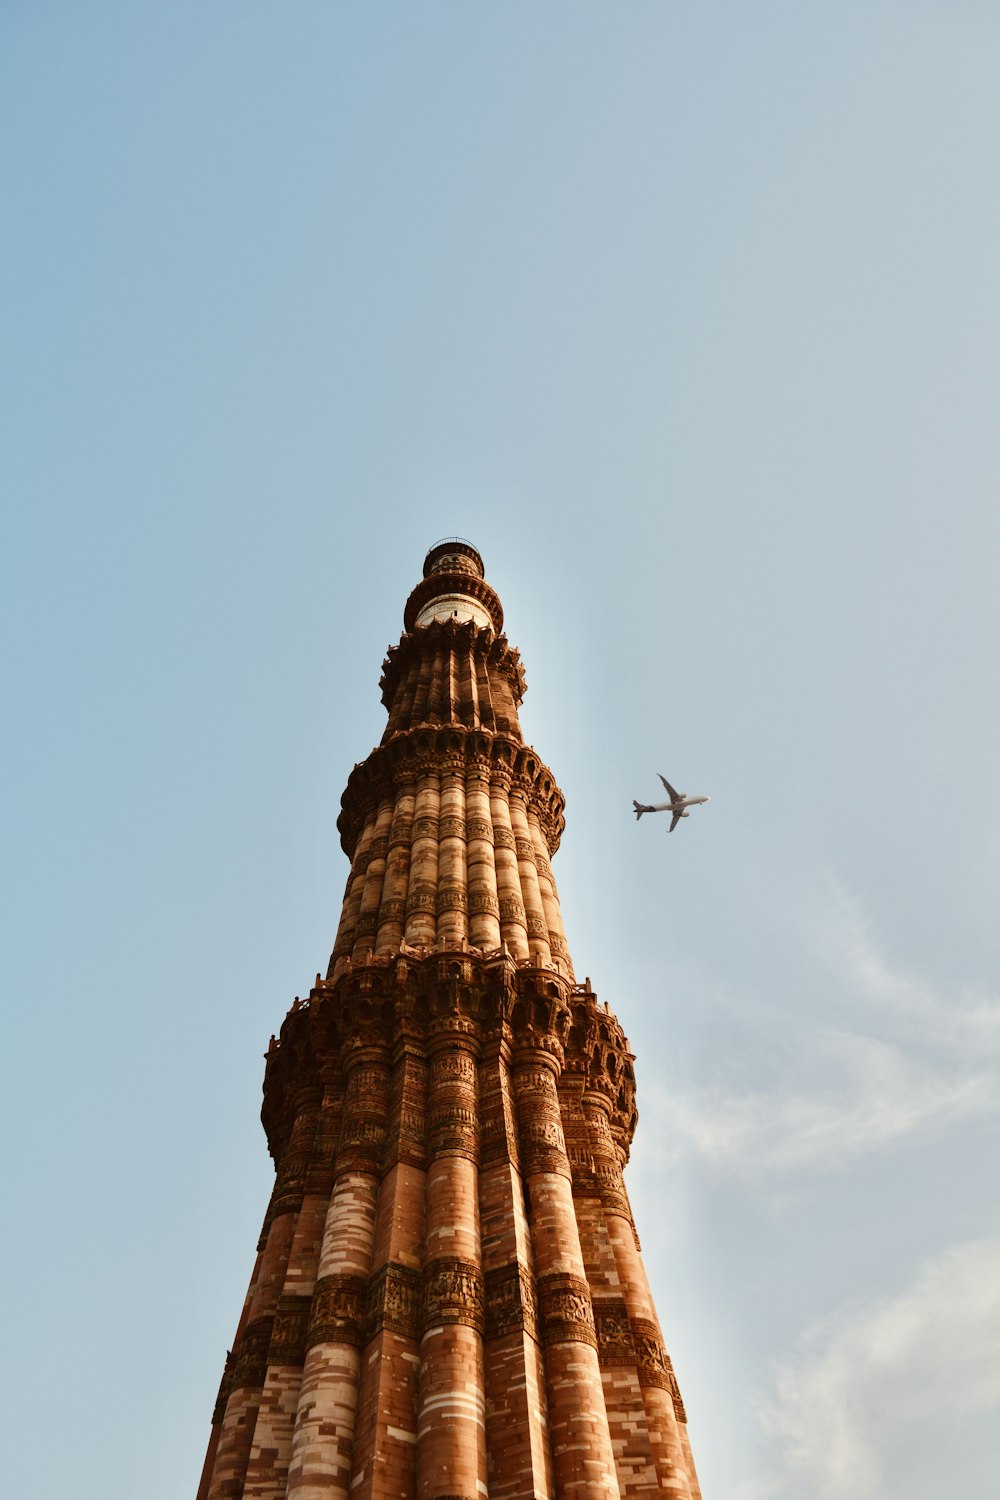 a plane flying over a tall tower with Qutub Minar in the background